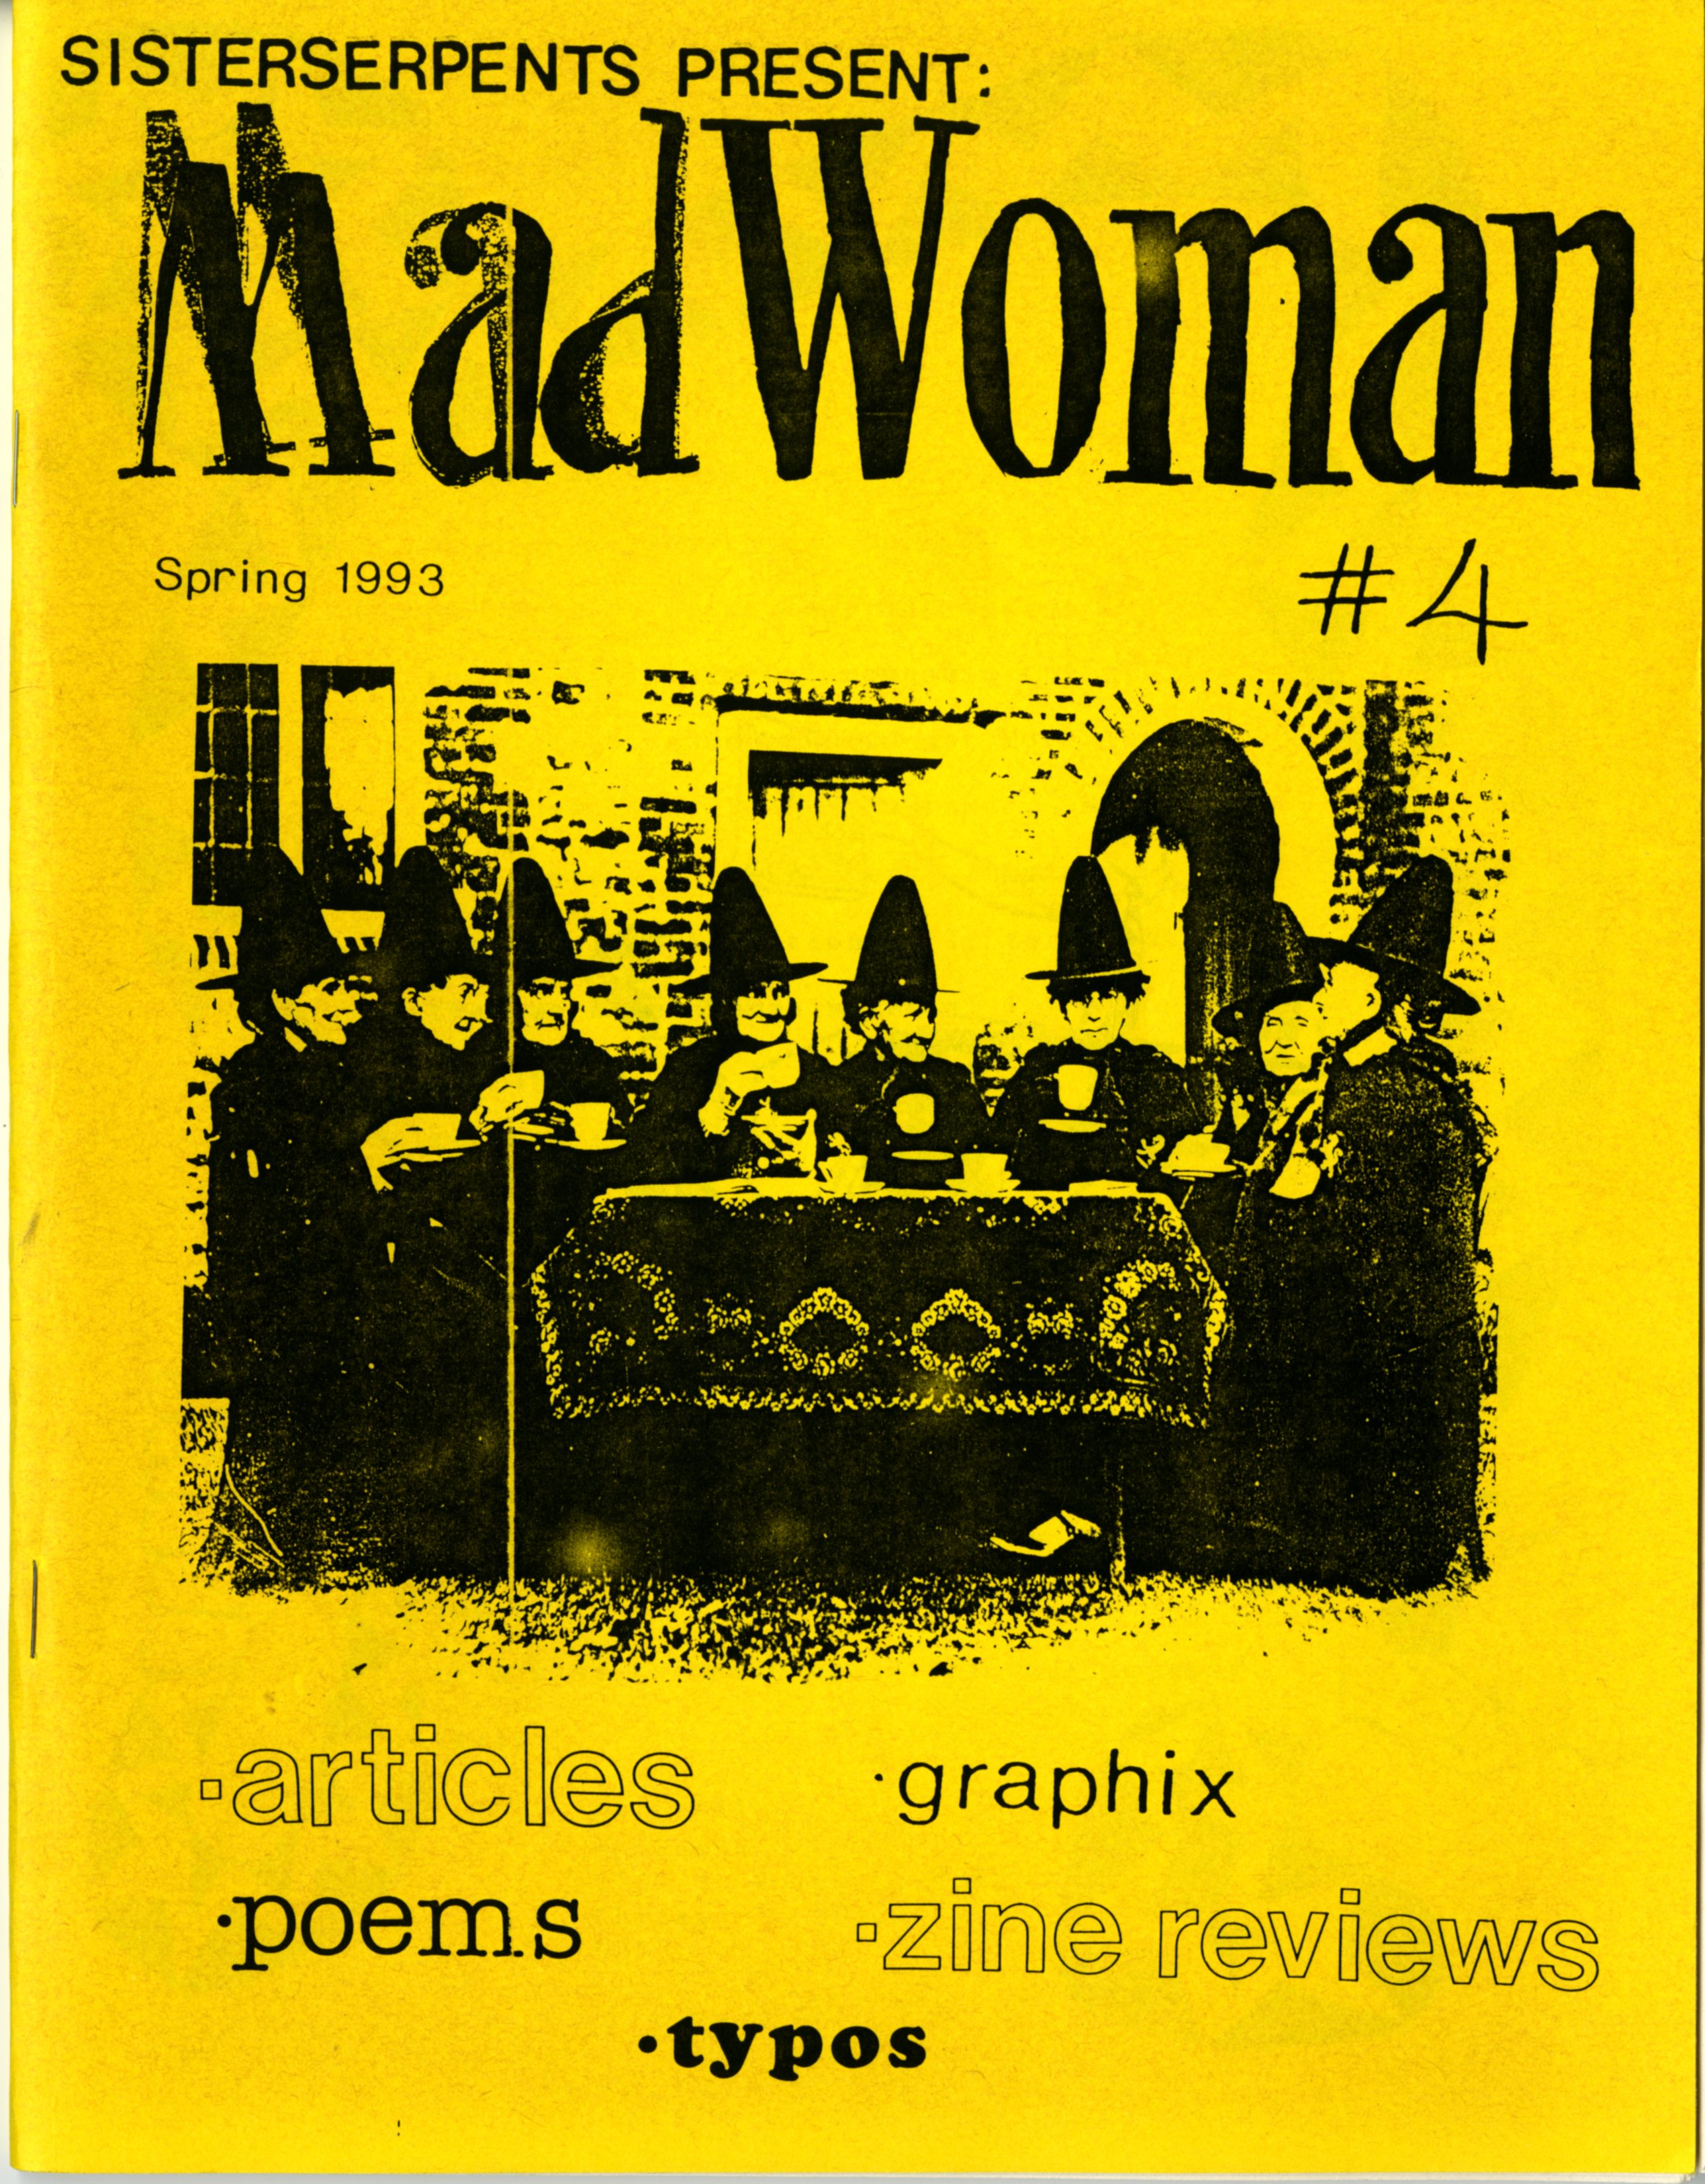 SisterSerpents - Mad Woman, Spring 1993 Cover